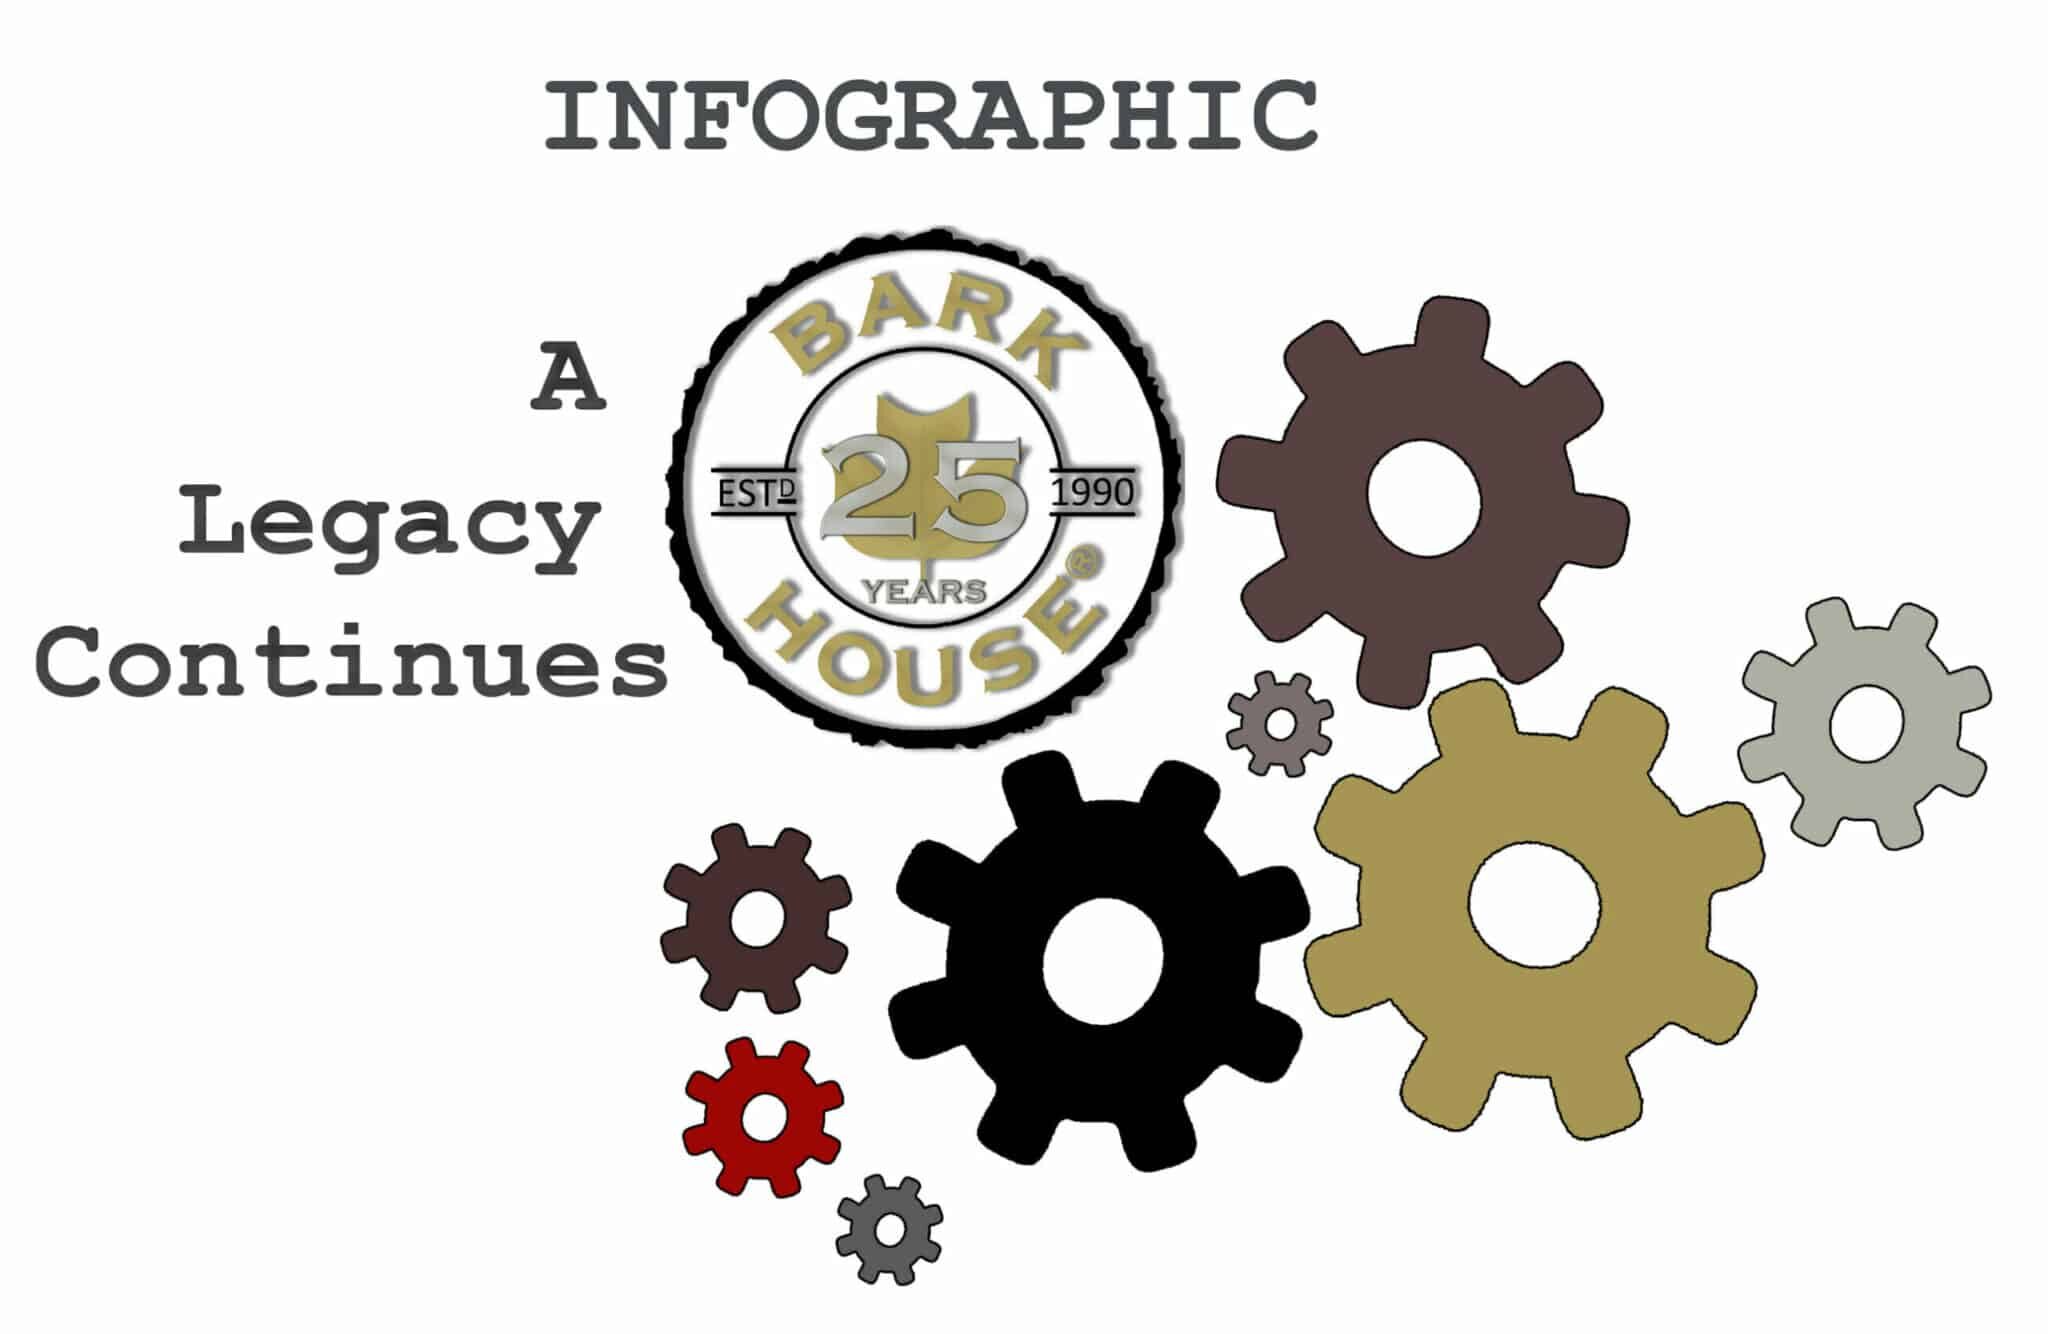 A Legacy Continues for Bark House Infographic Feature Pic